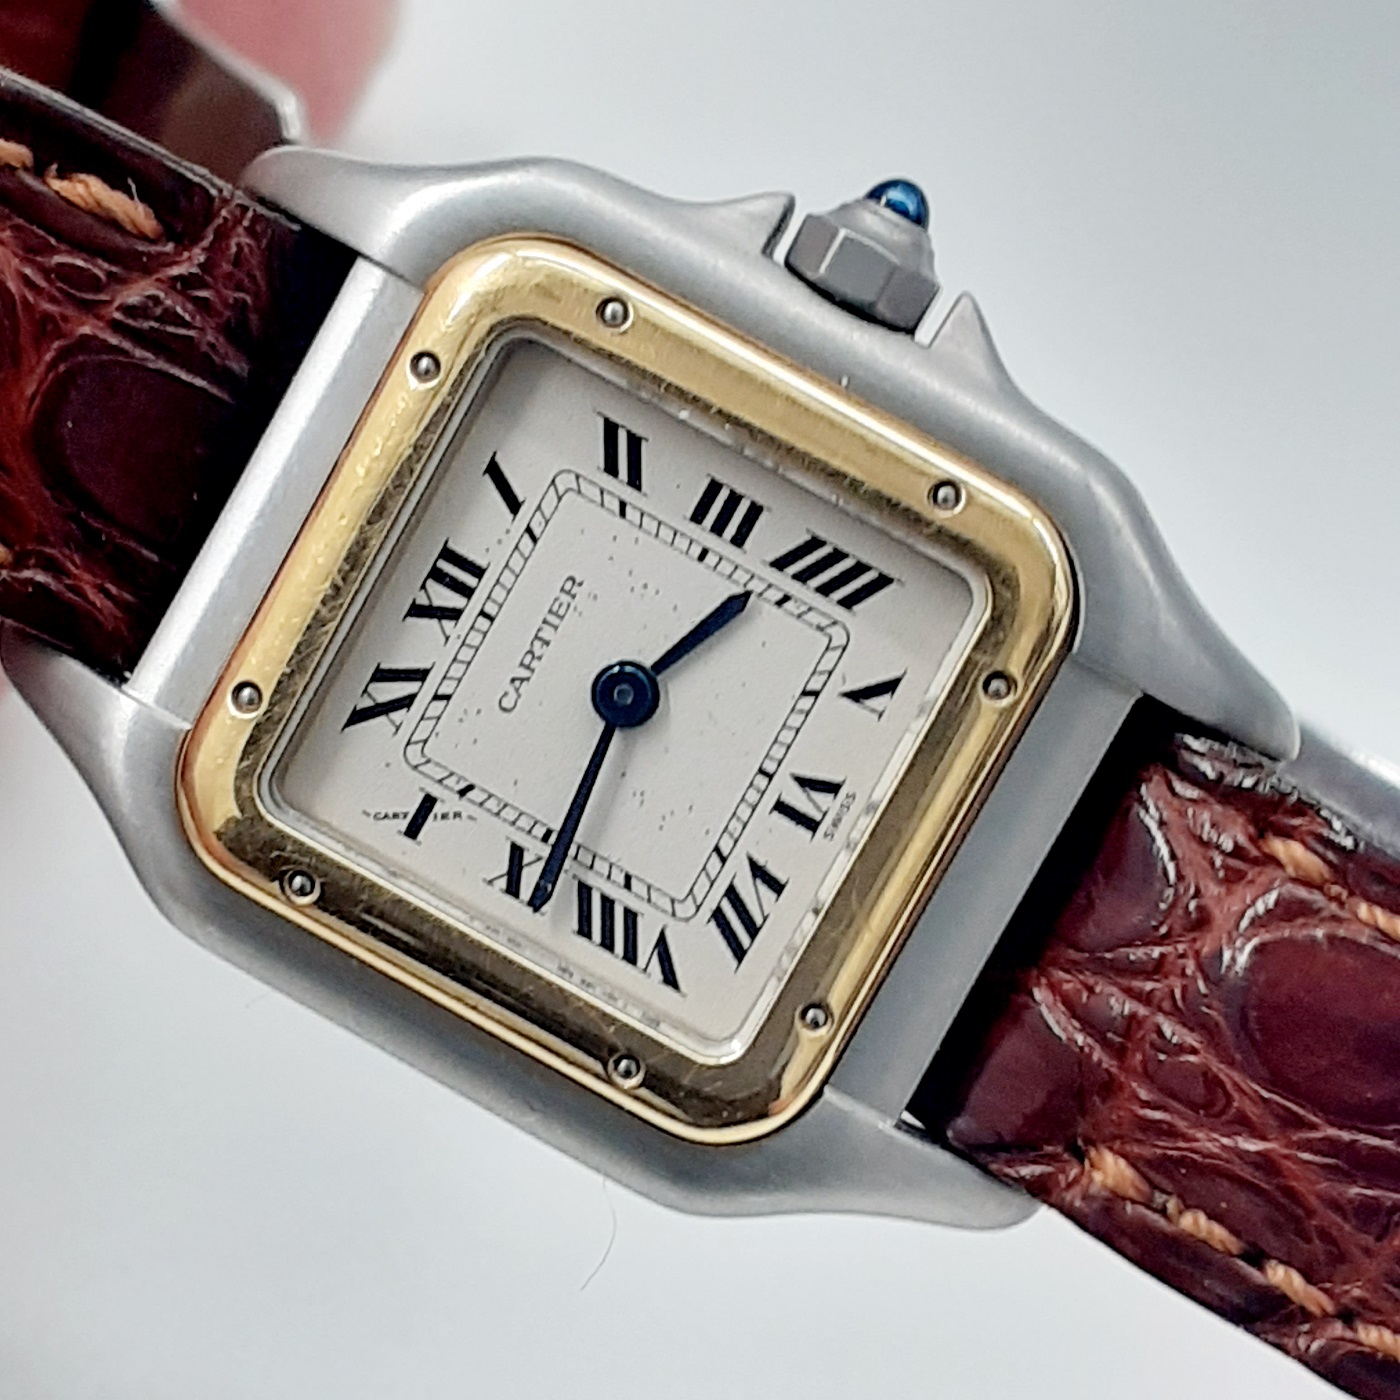 Cartier Panthere 1120 Ladies